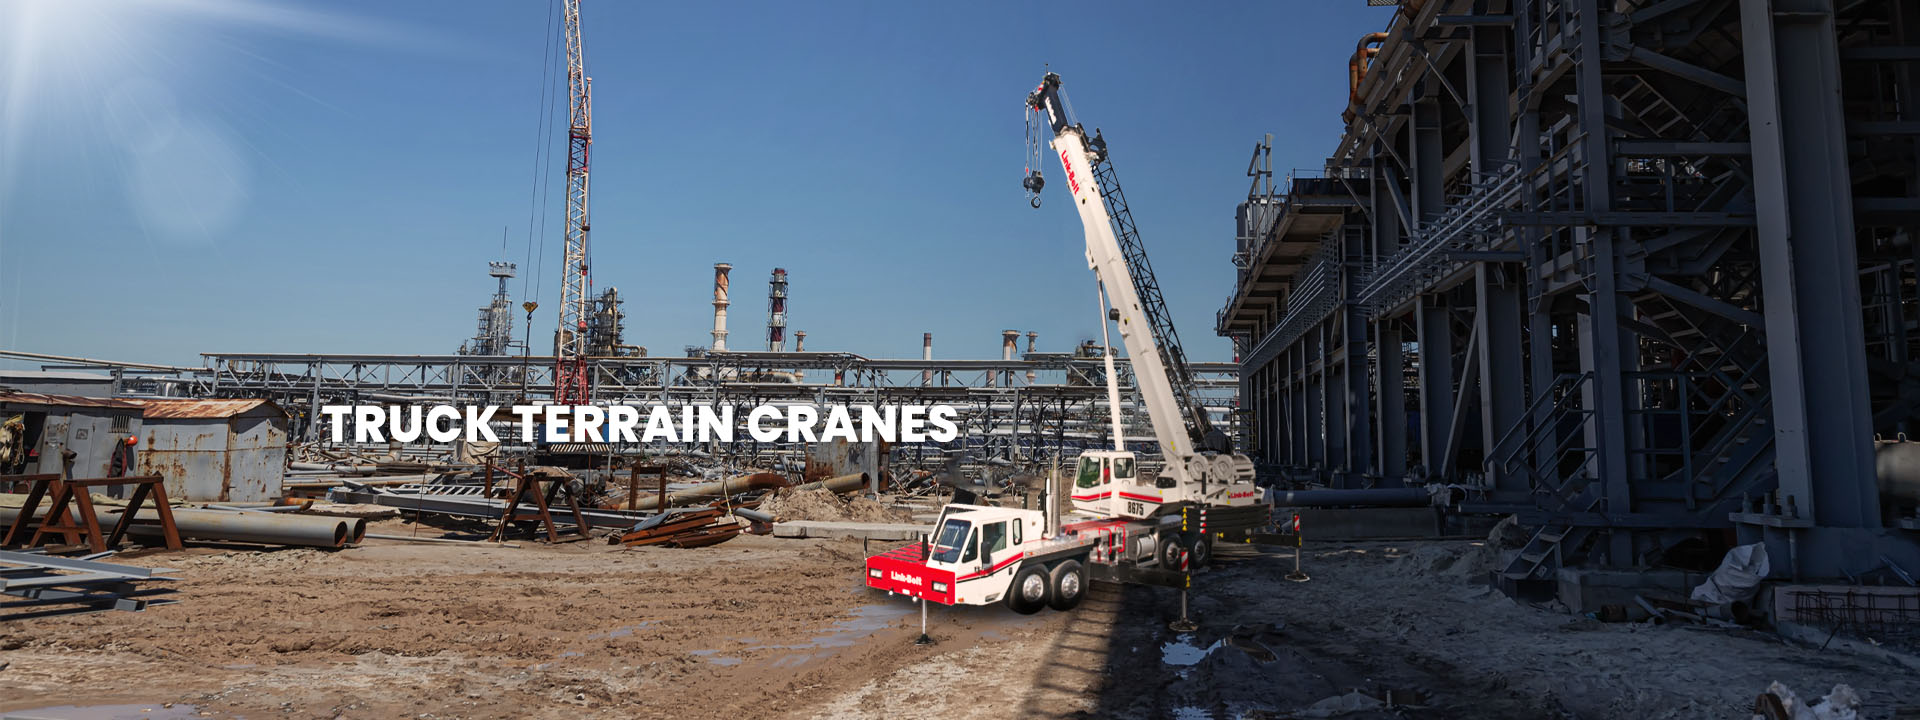 2 4 main types of mobile cranes commonly used in construction